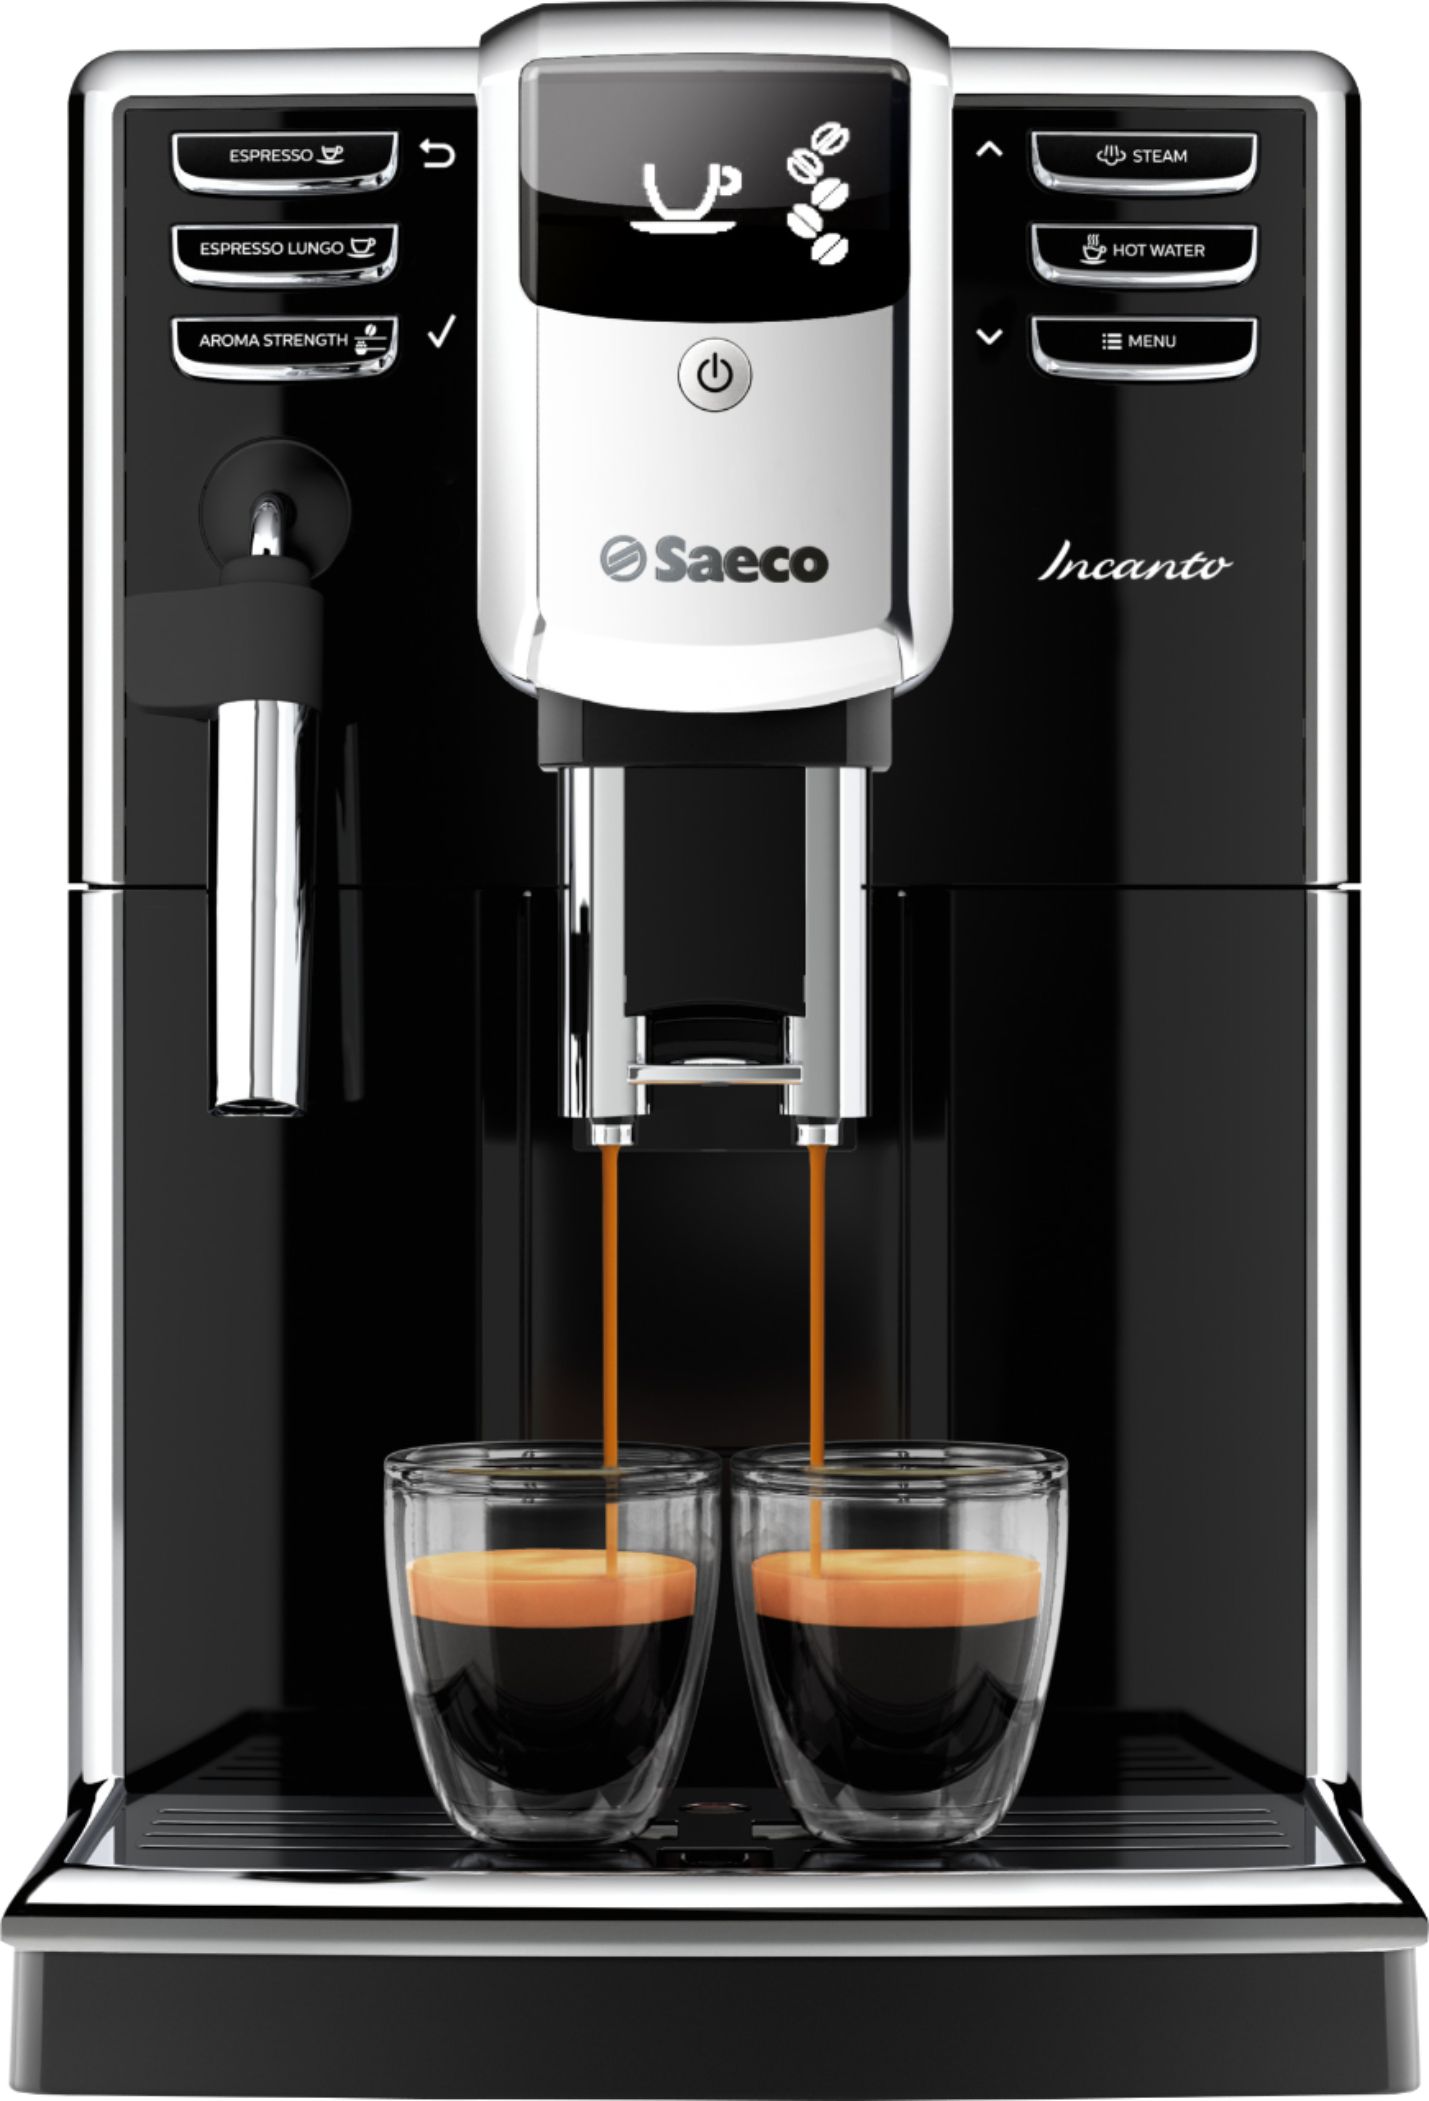 Reverberation Recite risk Best Buy: Saeco Incanto Espresso Machine with 15 bars of pressure, Milk  Frother and intergrated grinder Black HD8911/48